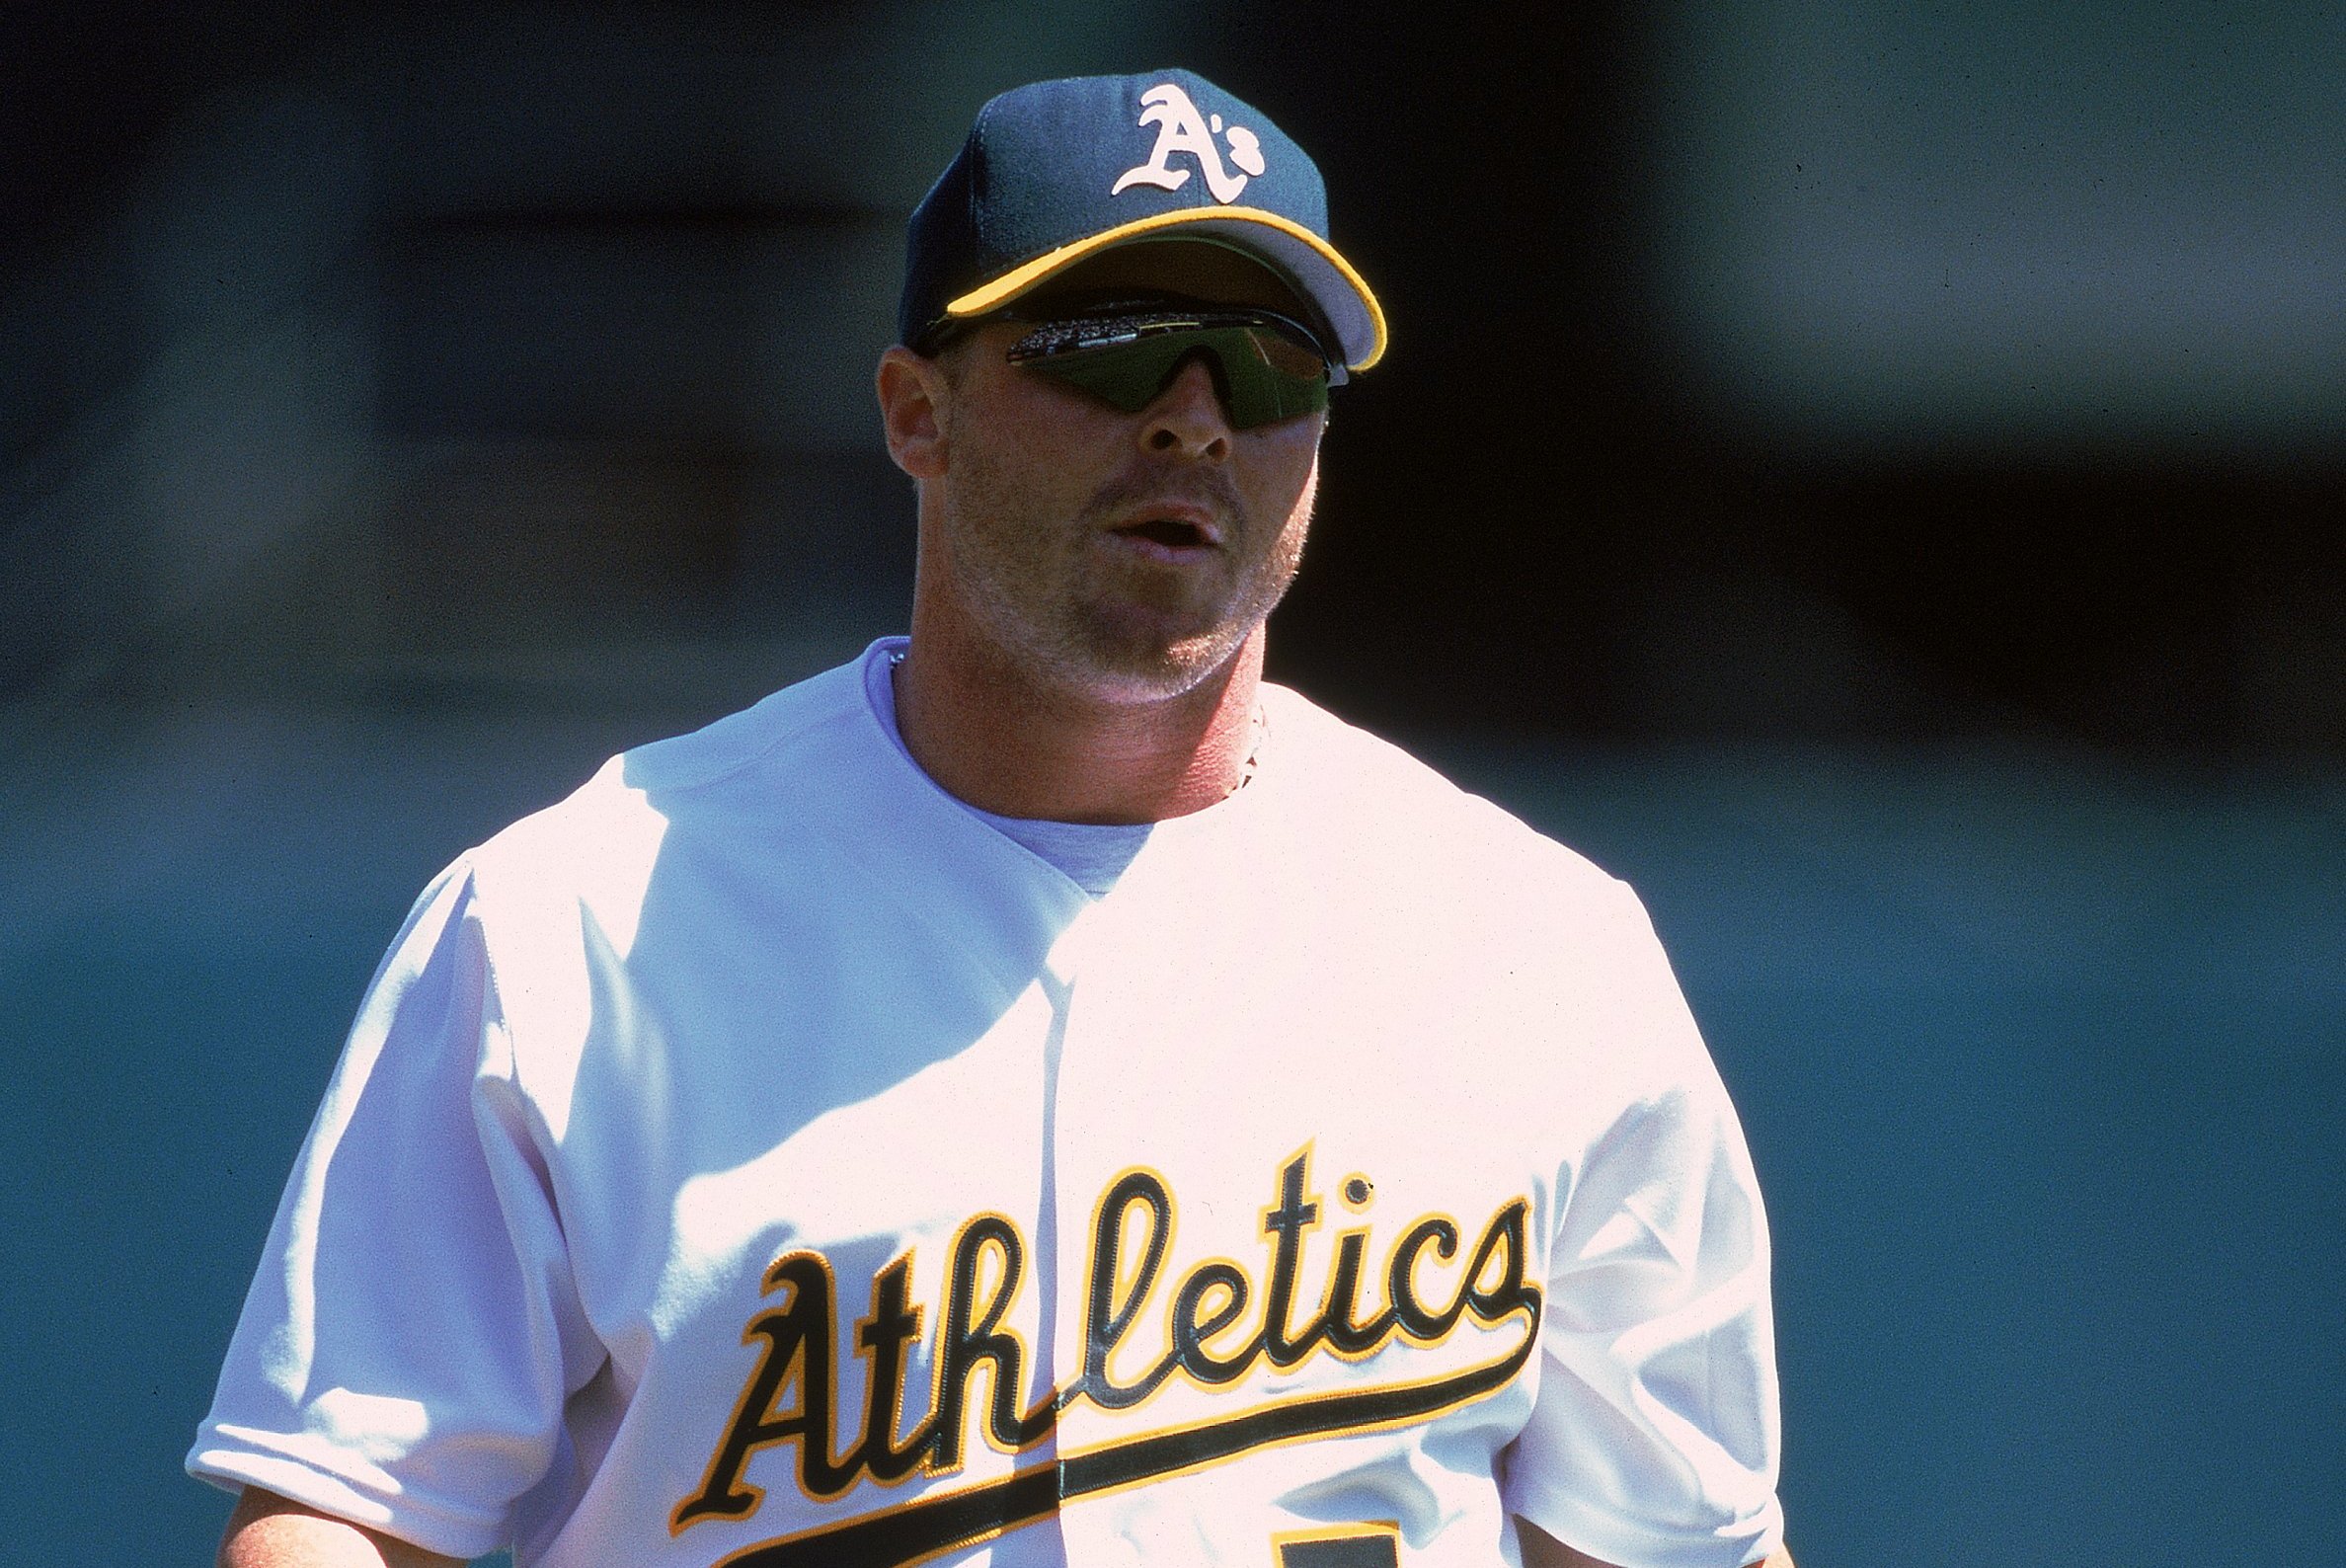 Jeremy Giambi, former Oakland Athletics player, died by suicide at